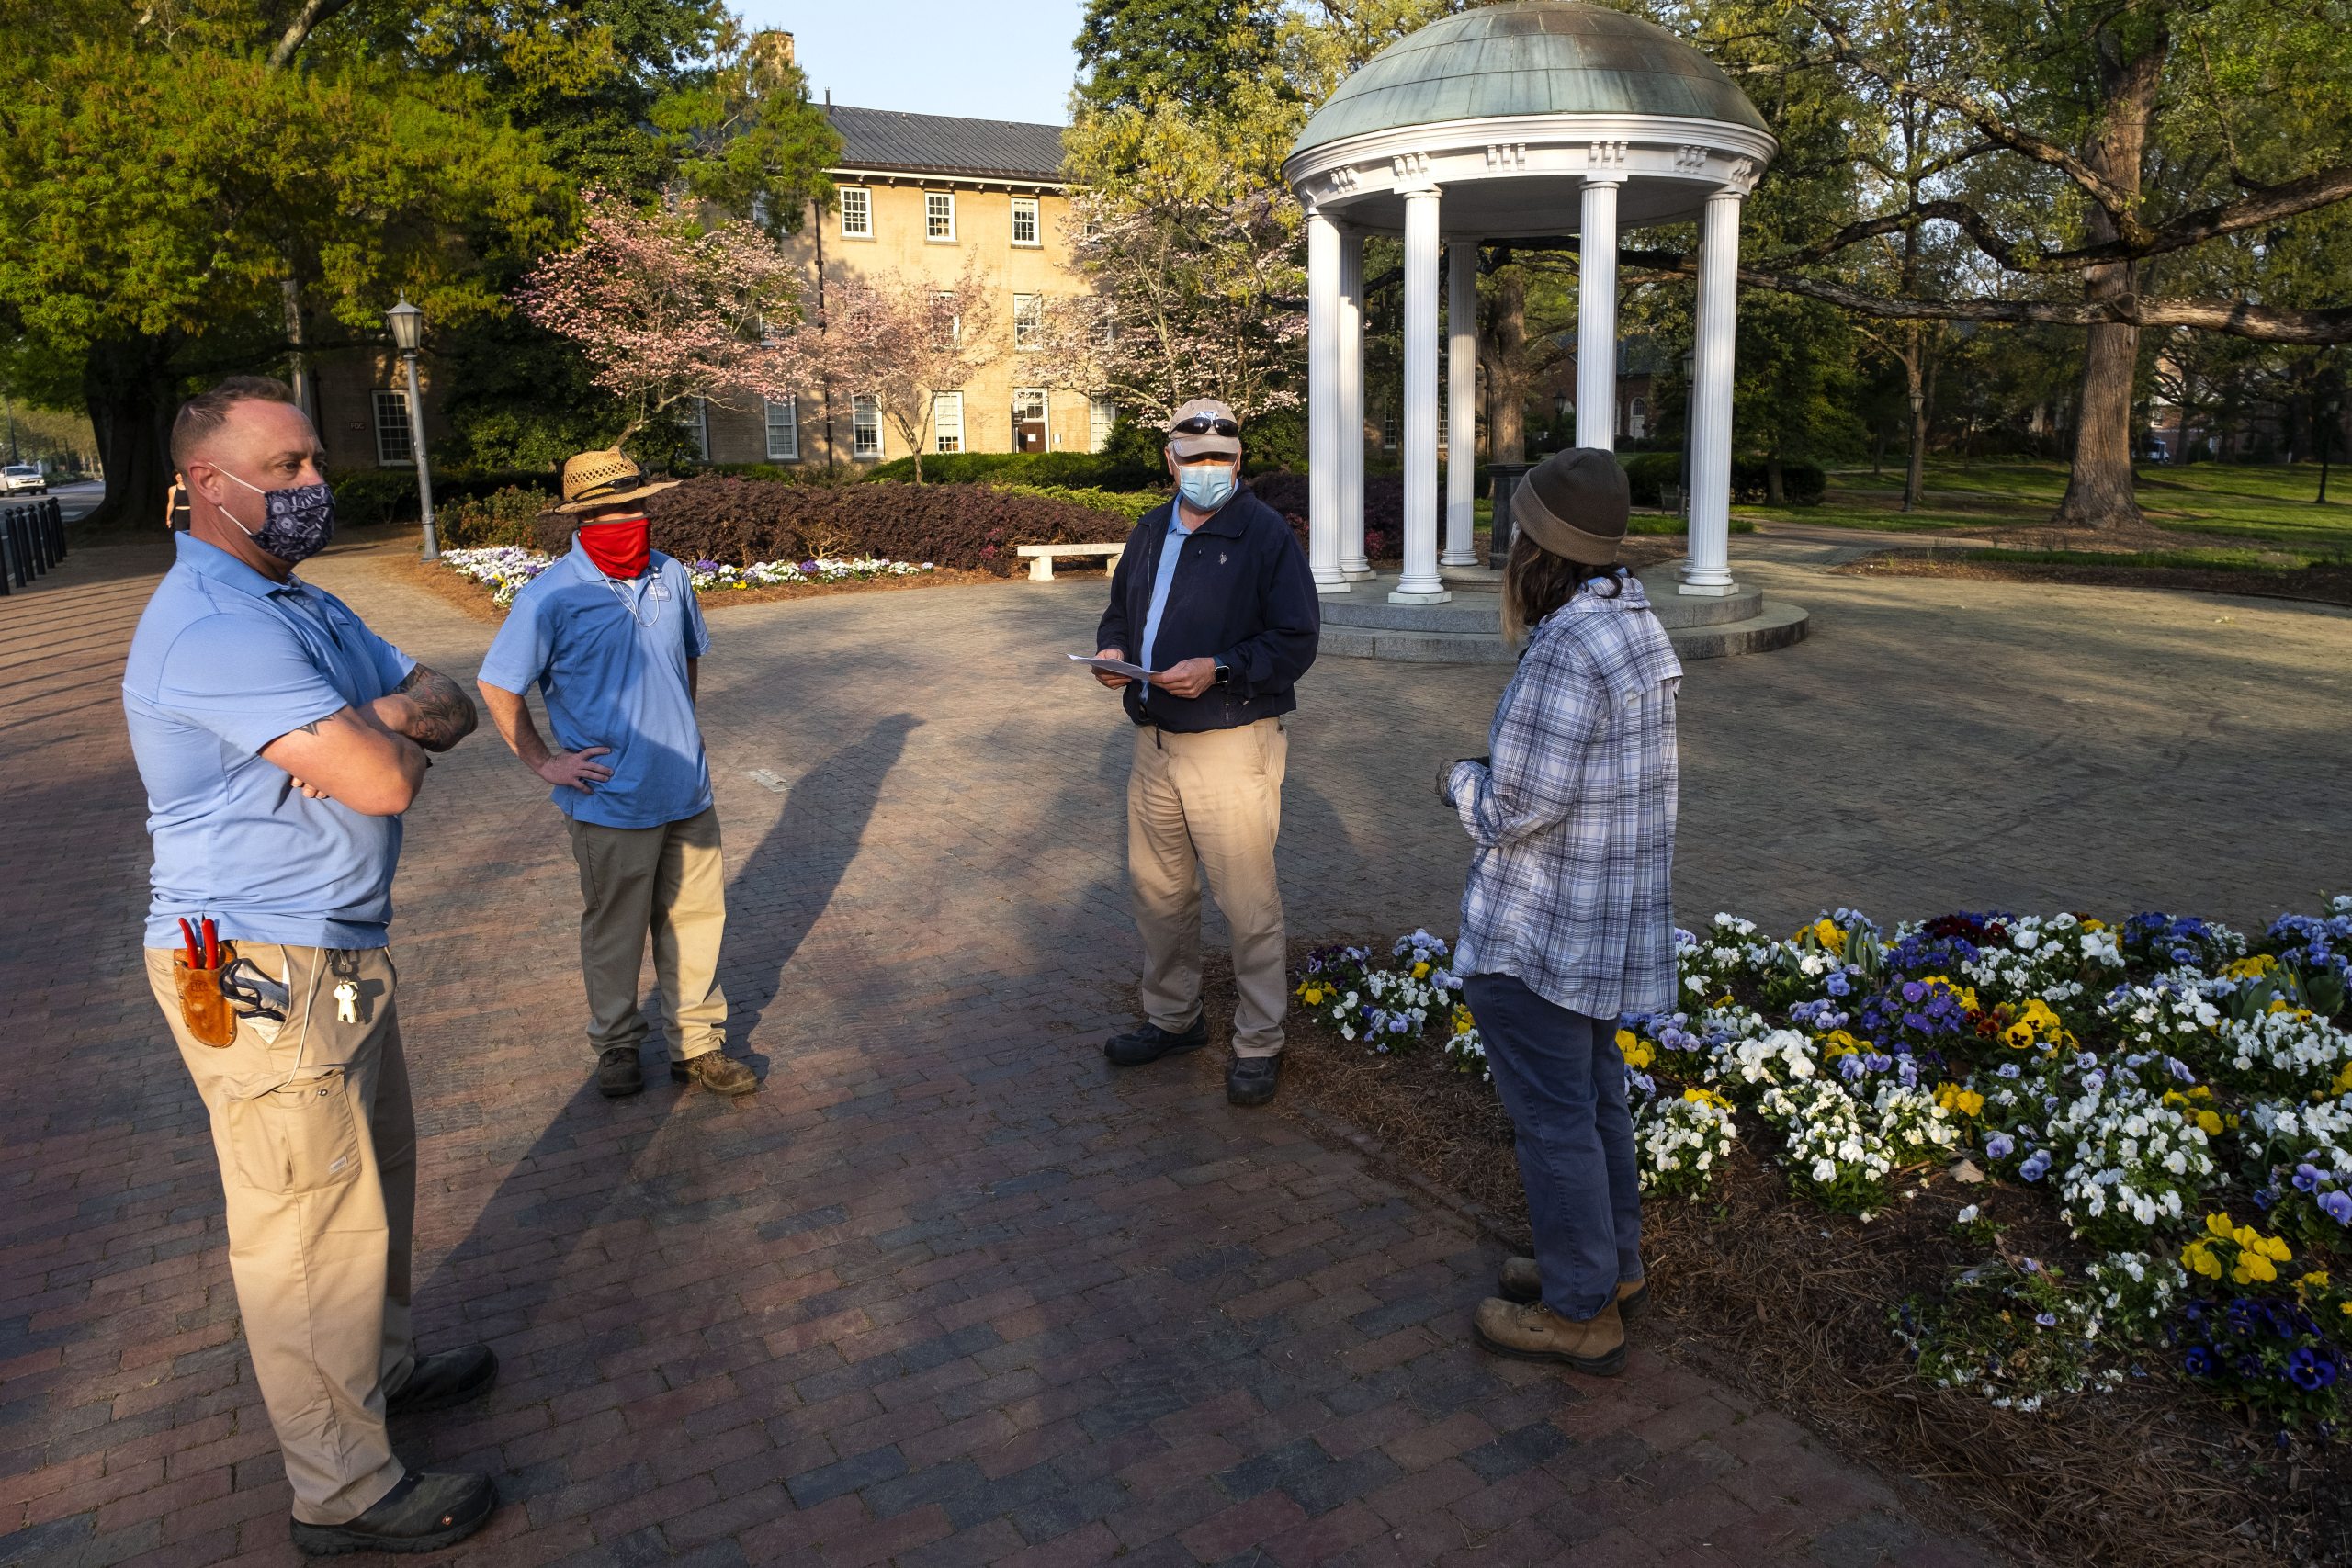 Peter Ampuja, second from right, checks in with the three crew members, left to right, Eric Tolar, Ryan Talley and Krystal King.They had similar meetings at 7 a.m. every day while they were the only groundskeepers working in the historic campus area. “During the pandemic the pace of the life changed but the beauty of campus didn't,” Ampuja said. “We continued providing a place for the community to enjoy, and campus visitors appreciate the hard work that Grounds crews put in ast spring. It was nice to have people sometimes stop to say ‘thank you’ to the crew.”